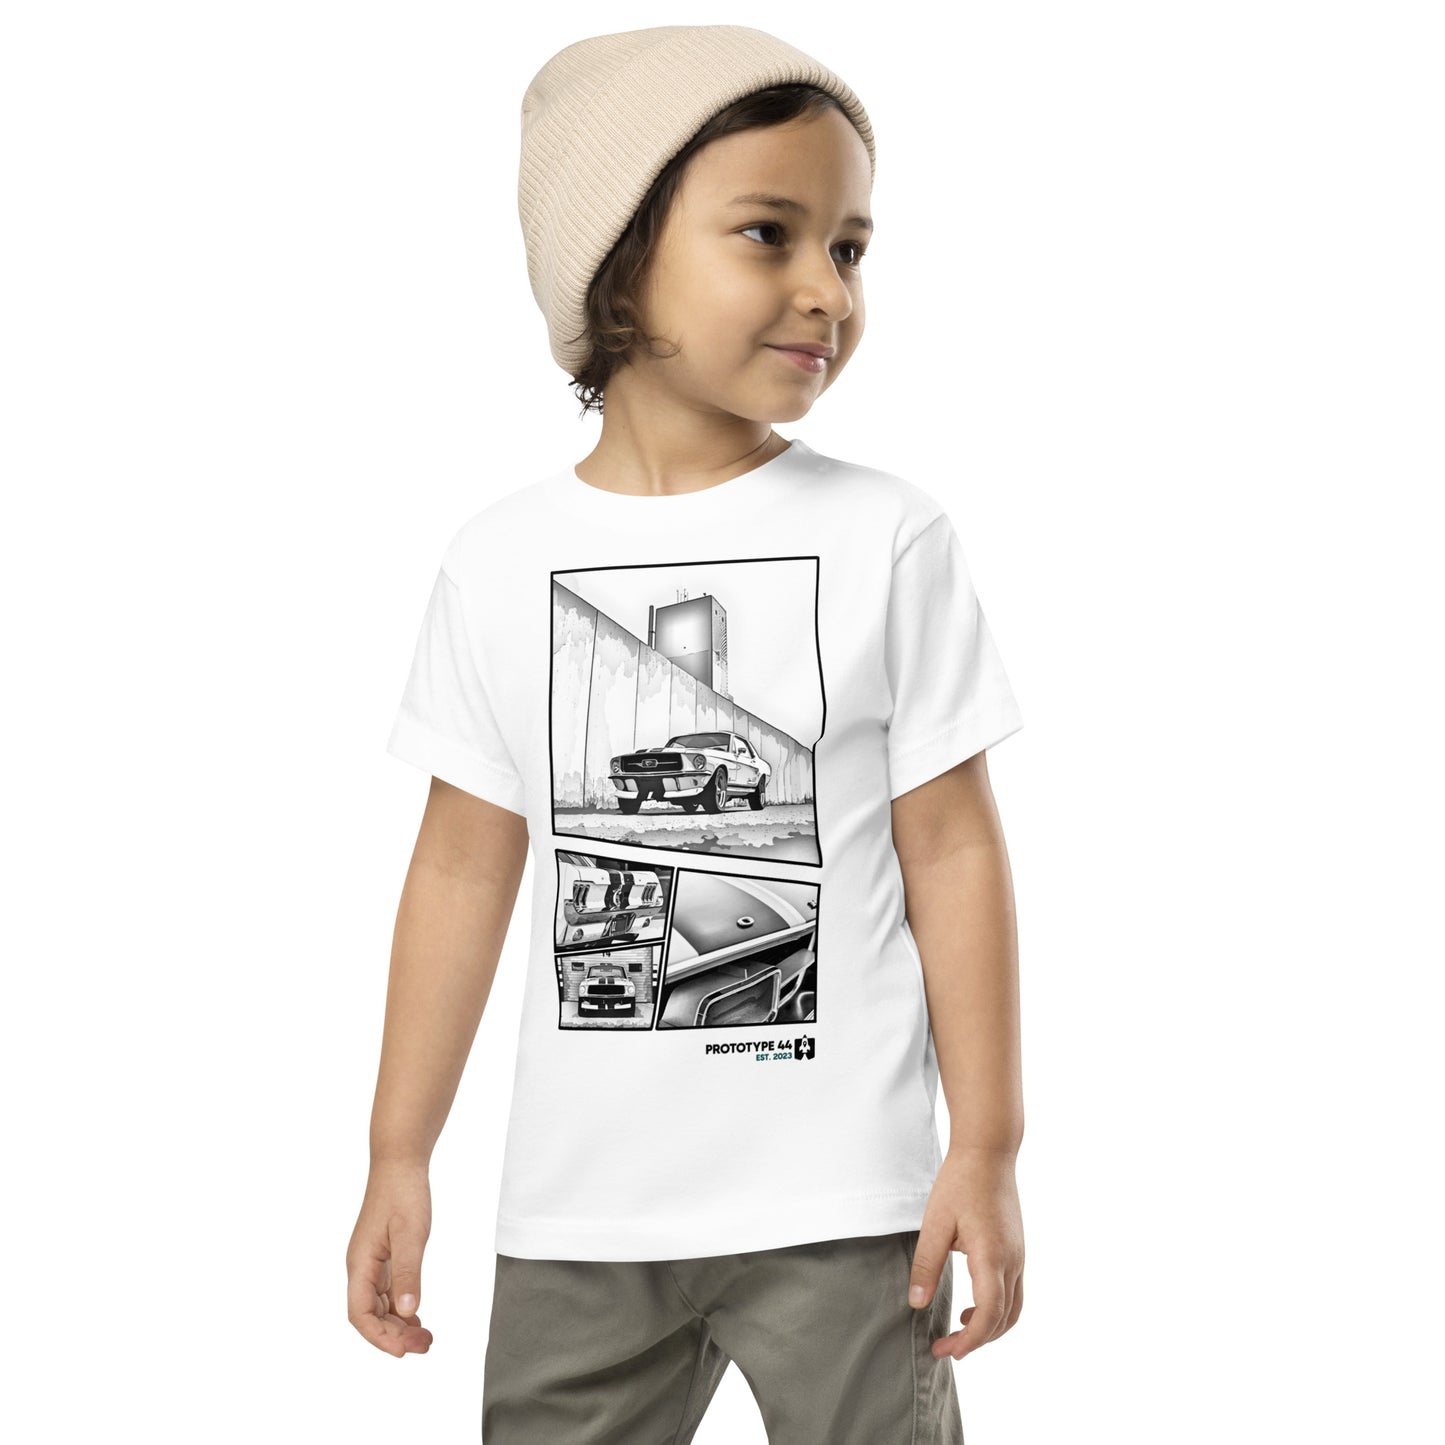 Toddler Tee - Classic Ford Mustang